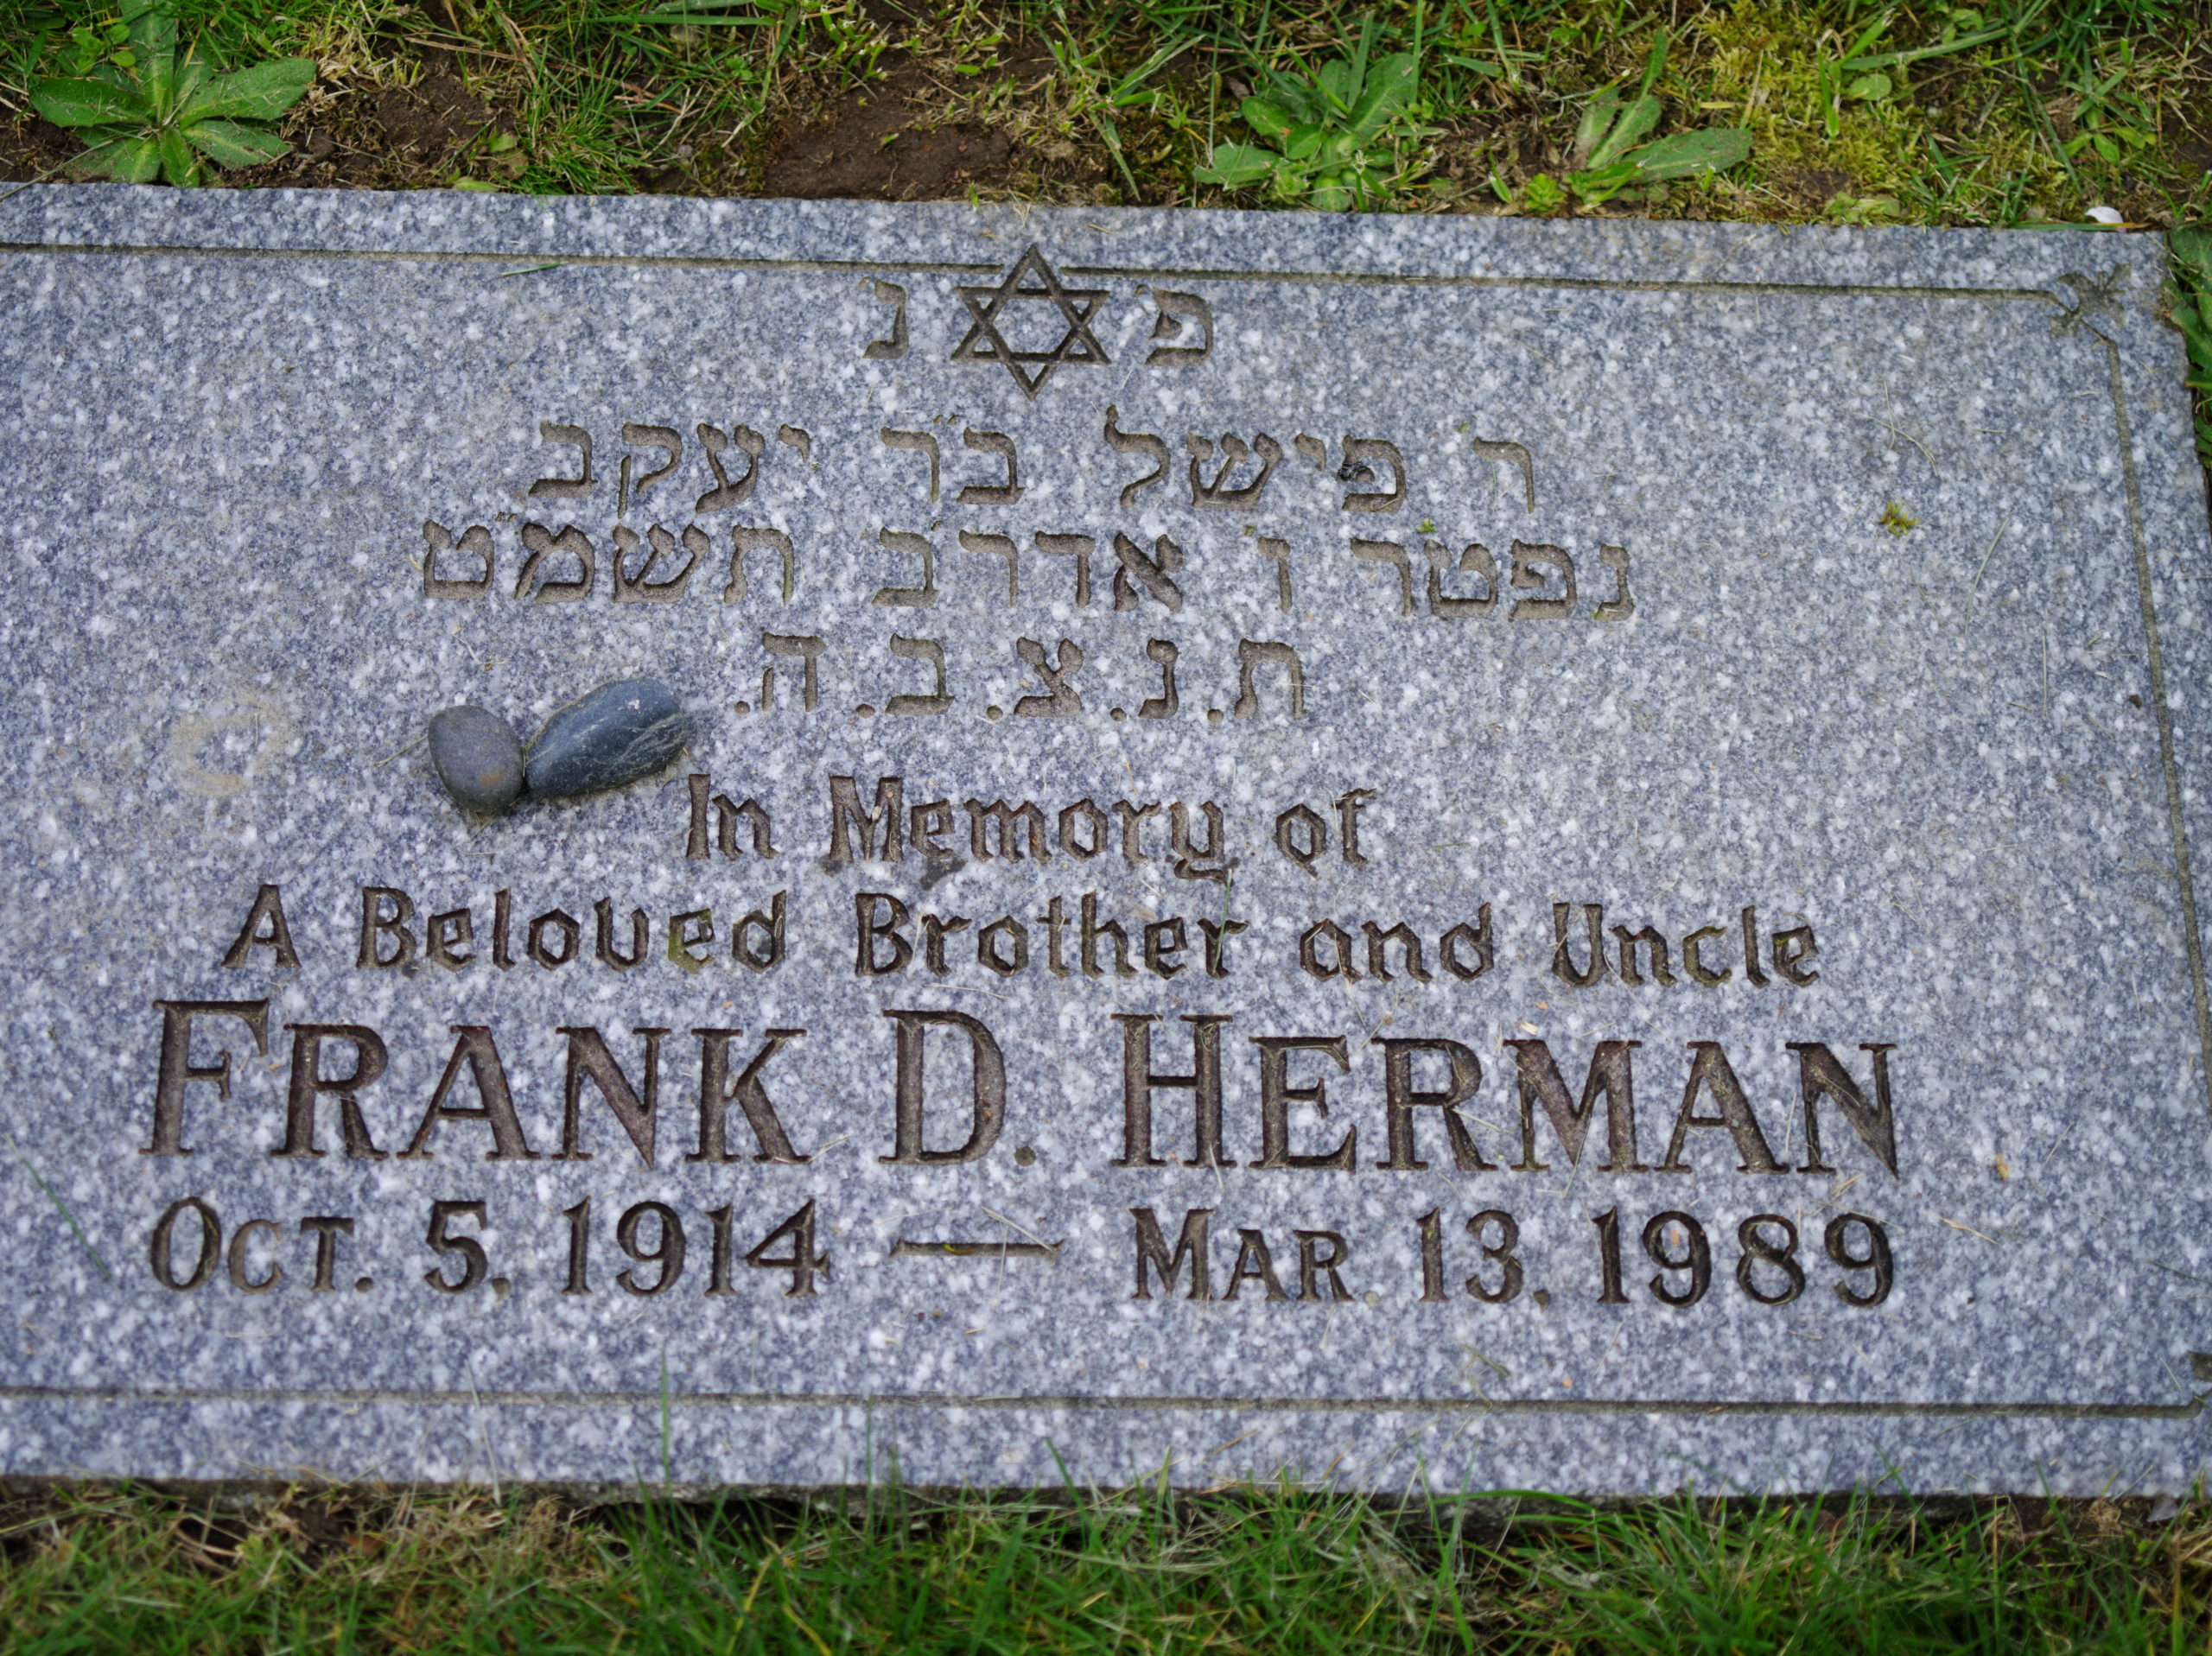 Image Description: Flat granite gravestone surrounded by grass. A thin border is carved around the edge of the gravestone making a frame. At the top is a six pointed star, also called a Star of David. There are two stones placed on the left side of the inscription, written in Hebrew and English. The written english text reads: In Memory of A Beloved Brother and Uncle FRANK D. HERMAN OCT.5.1914 - MAR 13.1989